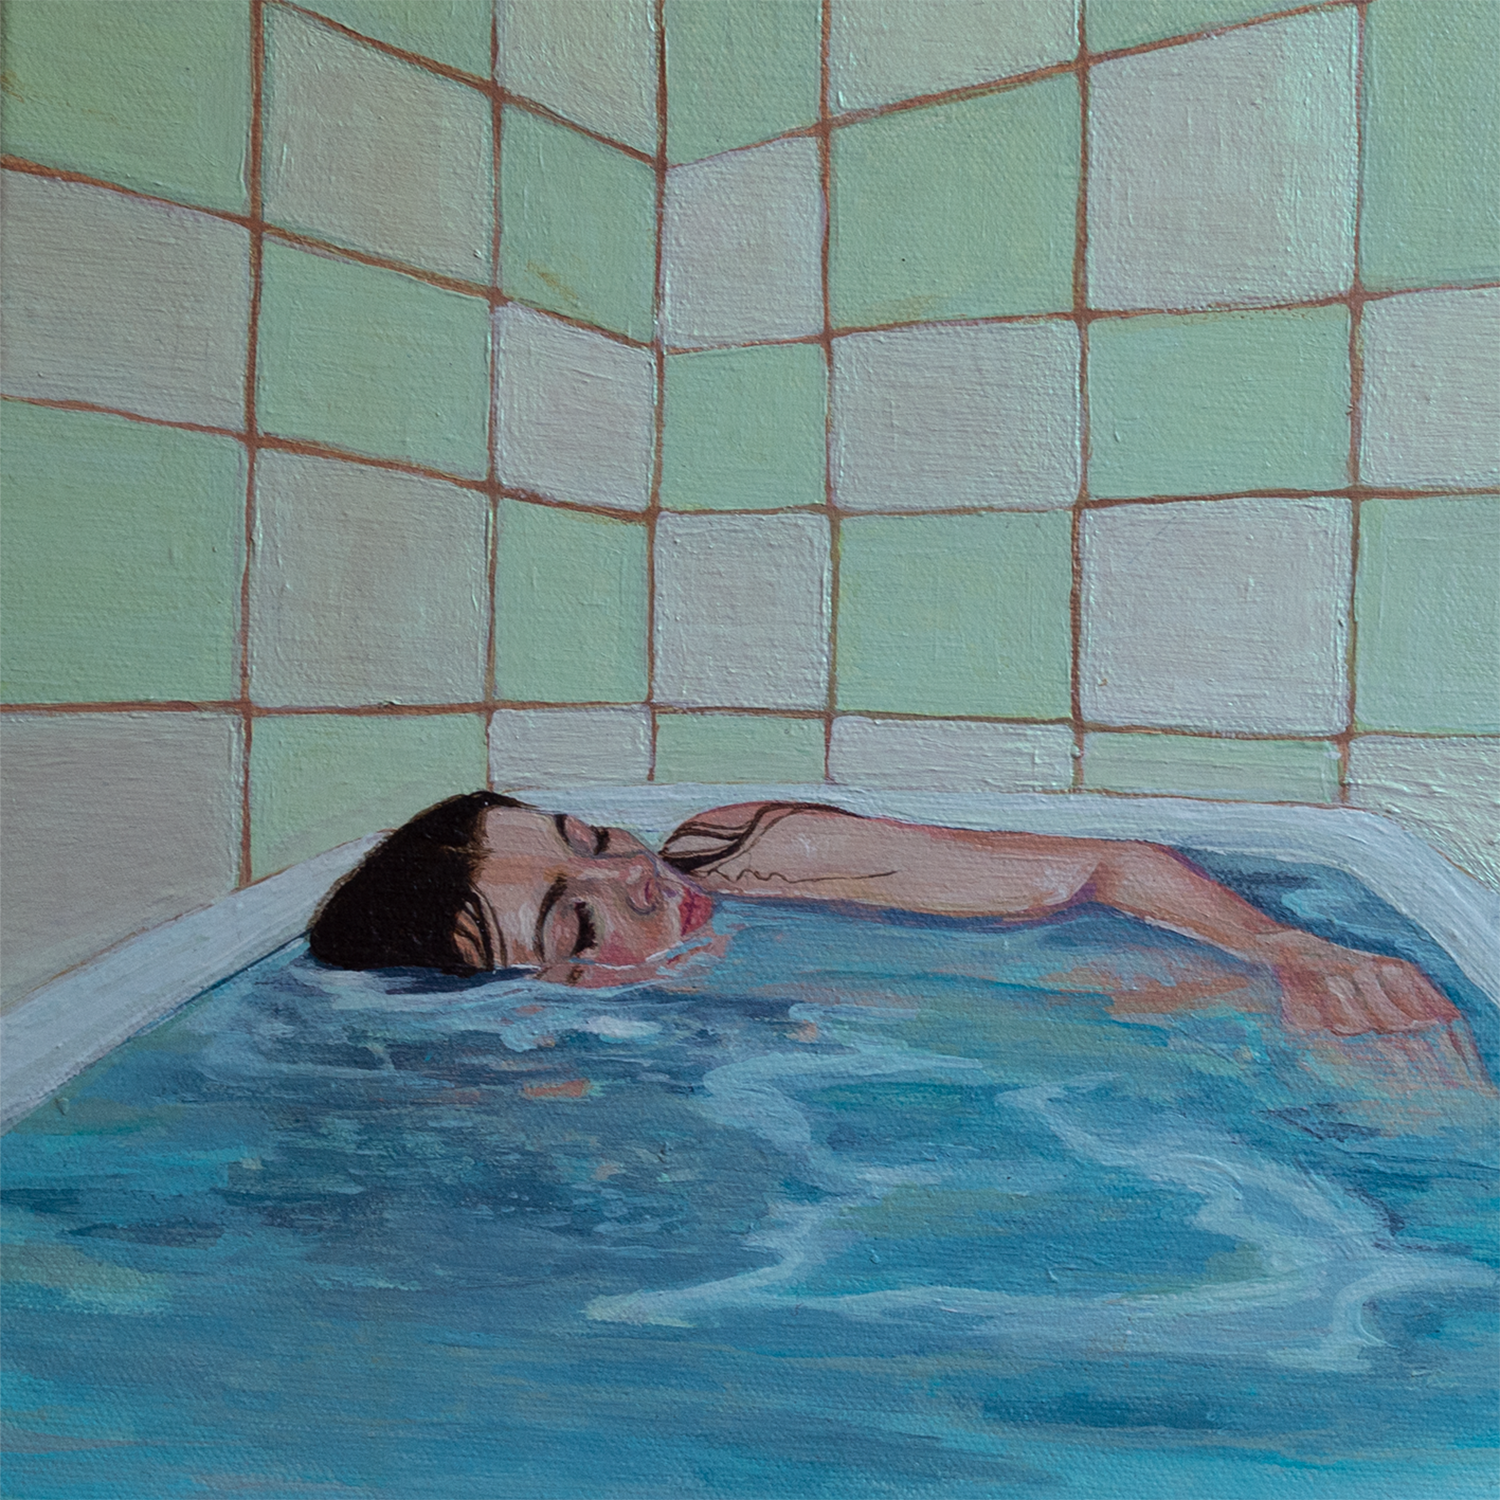 A girl relaxing half submerged in a bath that seems endless